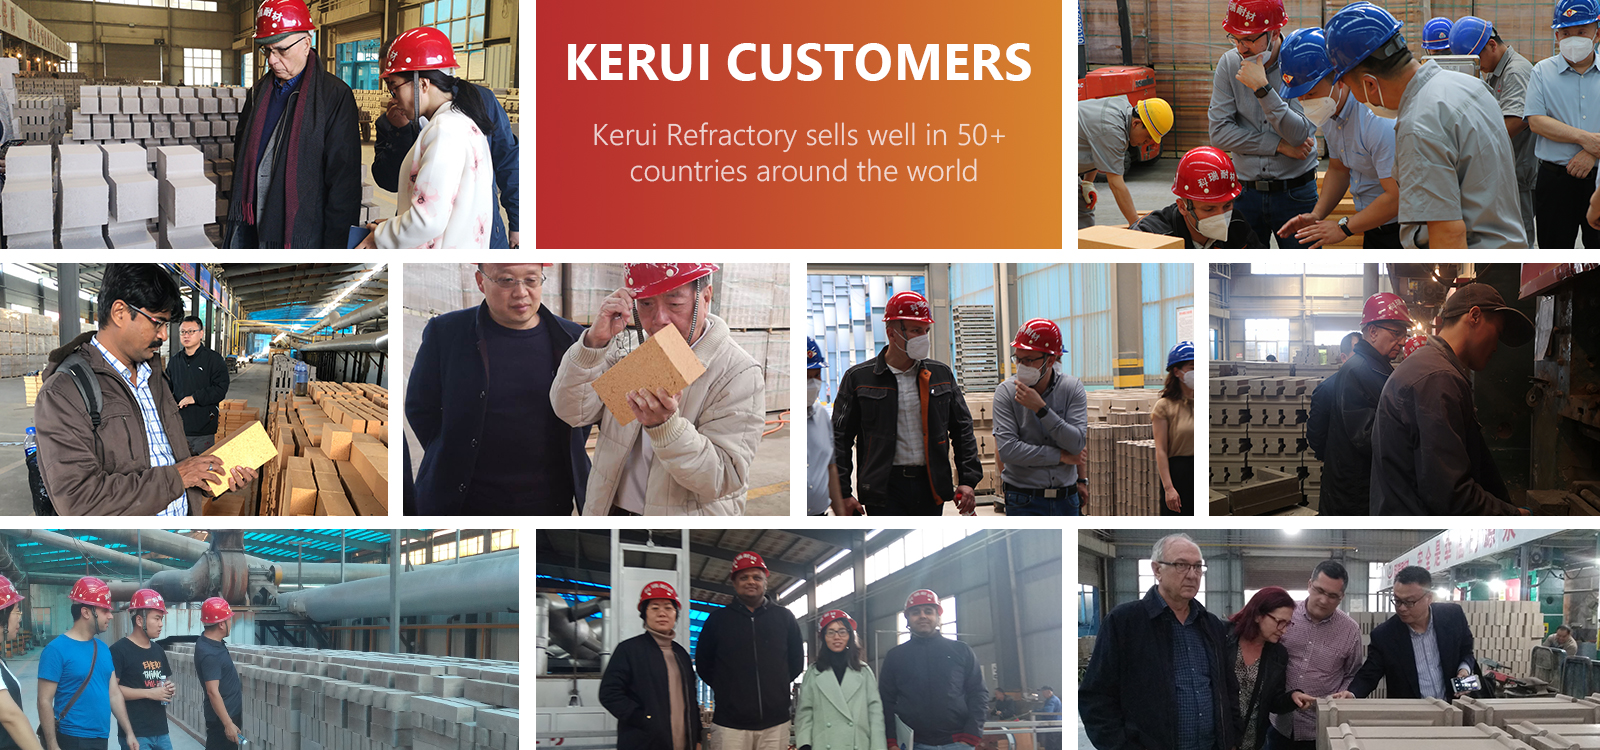 Benefits Offered by Kerui